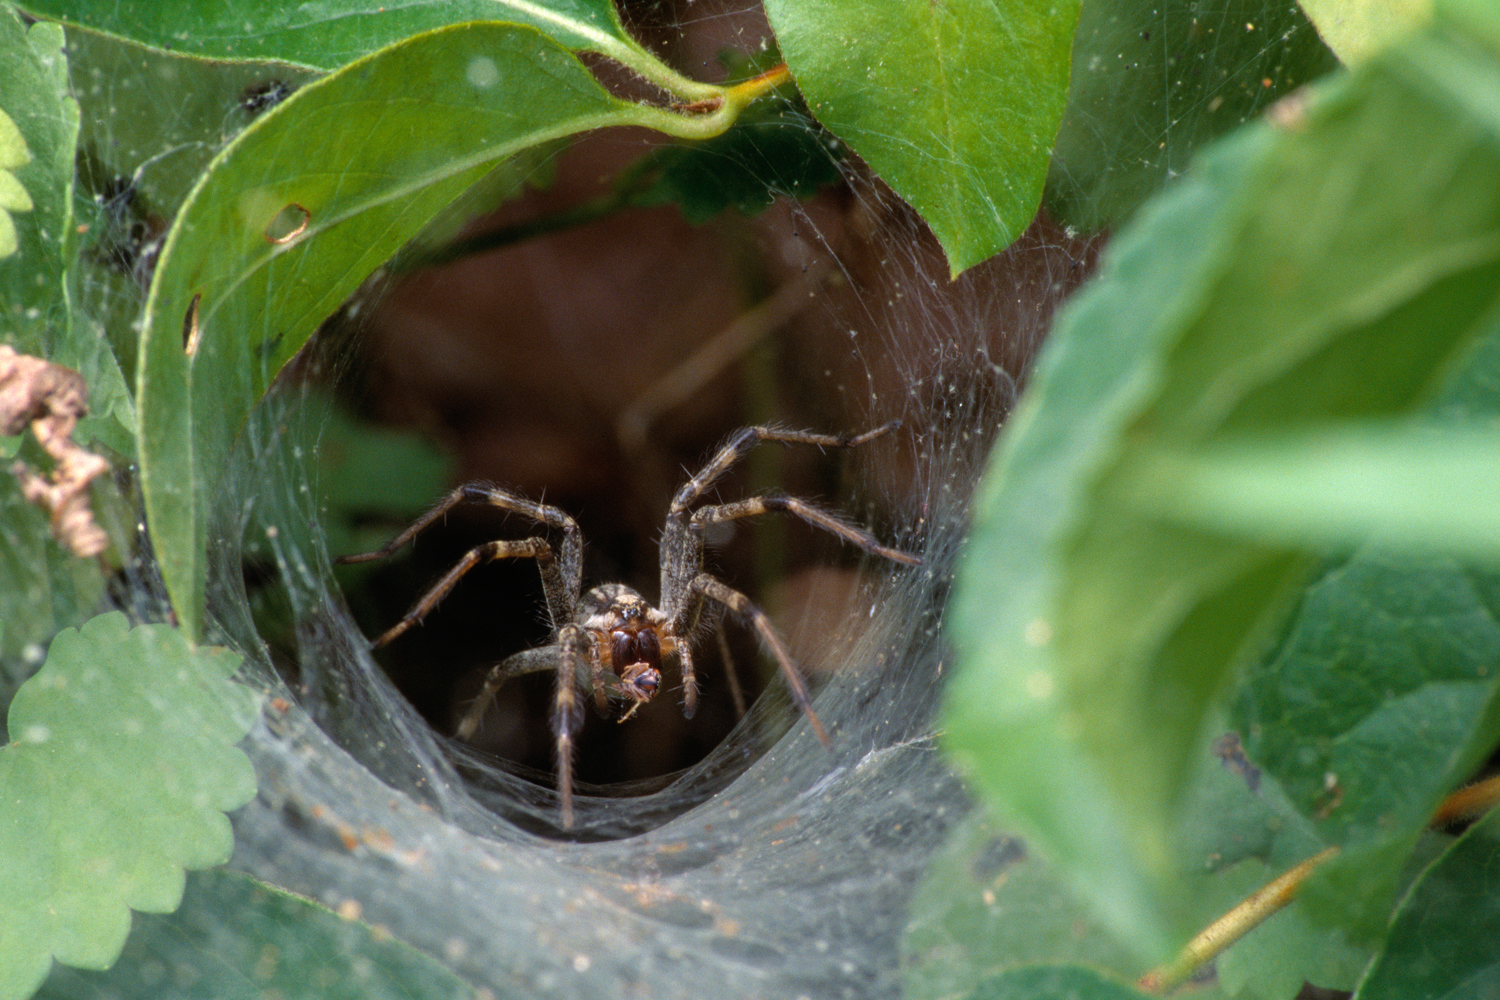 Experts warn: Beware of funnel-web spiders in this rain ...